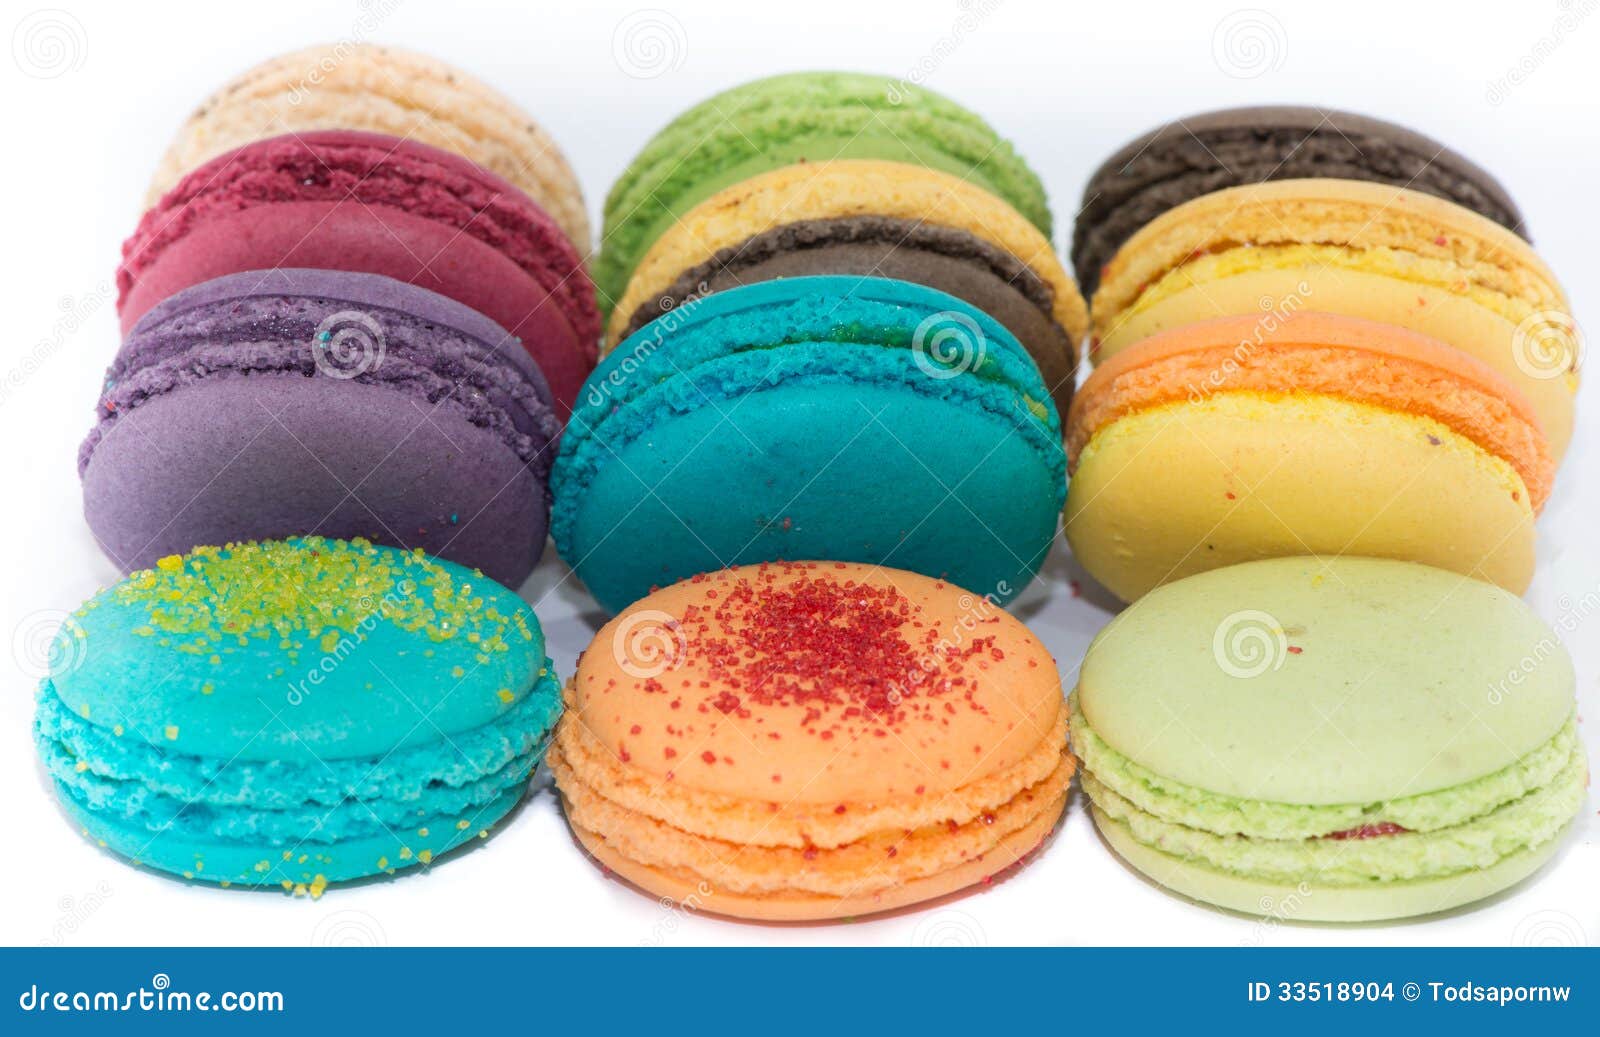 Traditional French Colorful Macaroons Stock Images - Image: 33518904